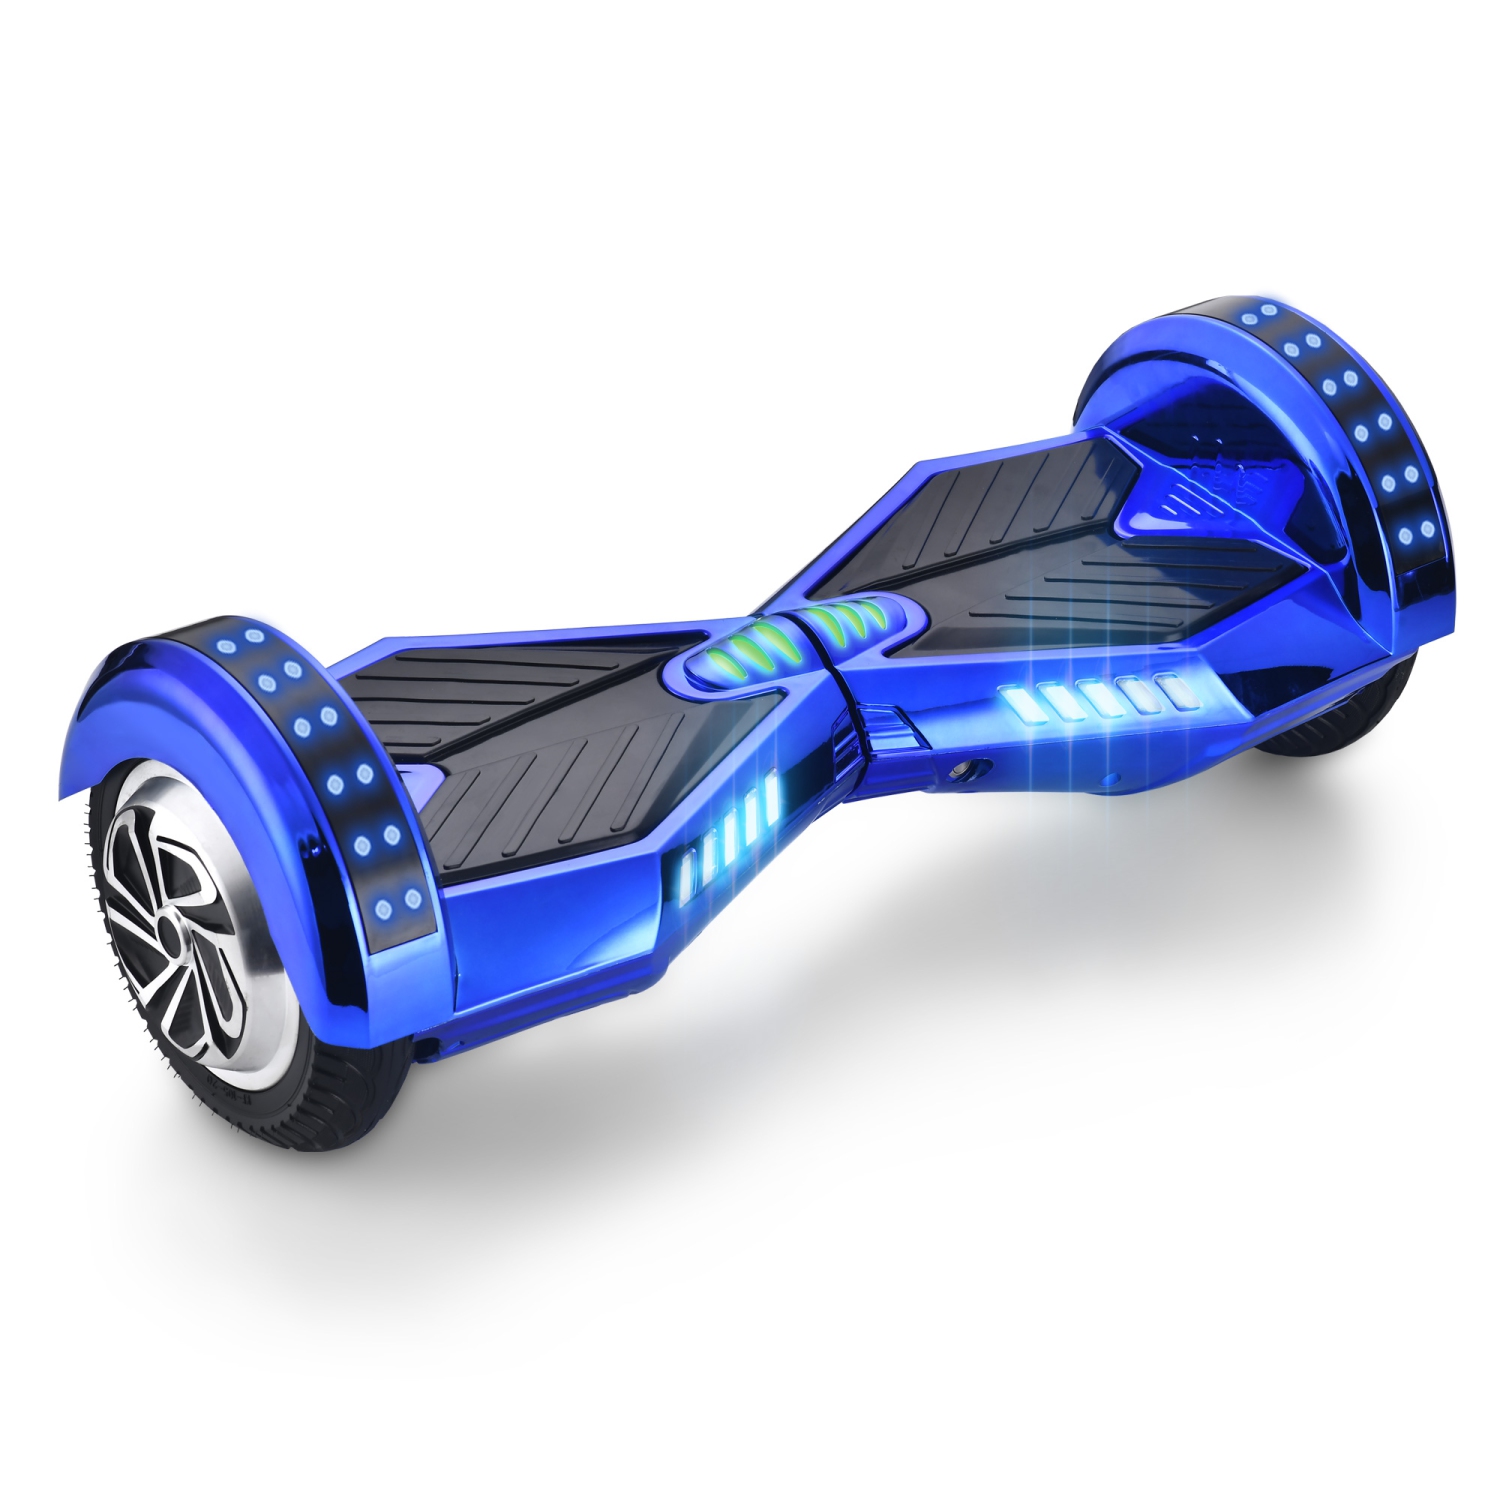 WEELMOTION 8" Chrome Blue Off-Road Hoverboard UL 2272 certified Hoverboard for Kids and Adults with LED lights and Music Speaker All Terrain Aluminum Wheel with free bag